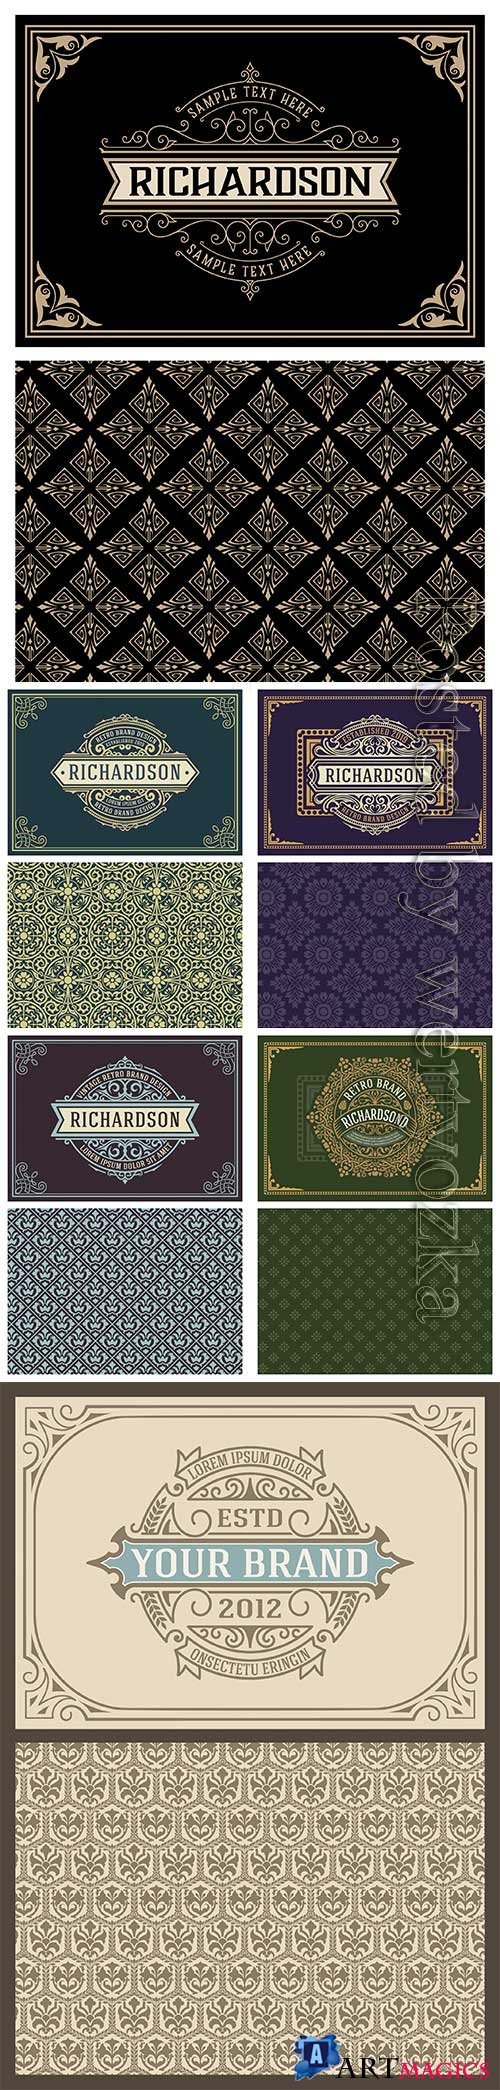 Vintage greeting vector card with ornate swirls and retro background template